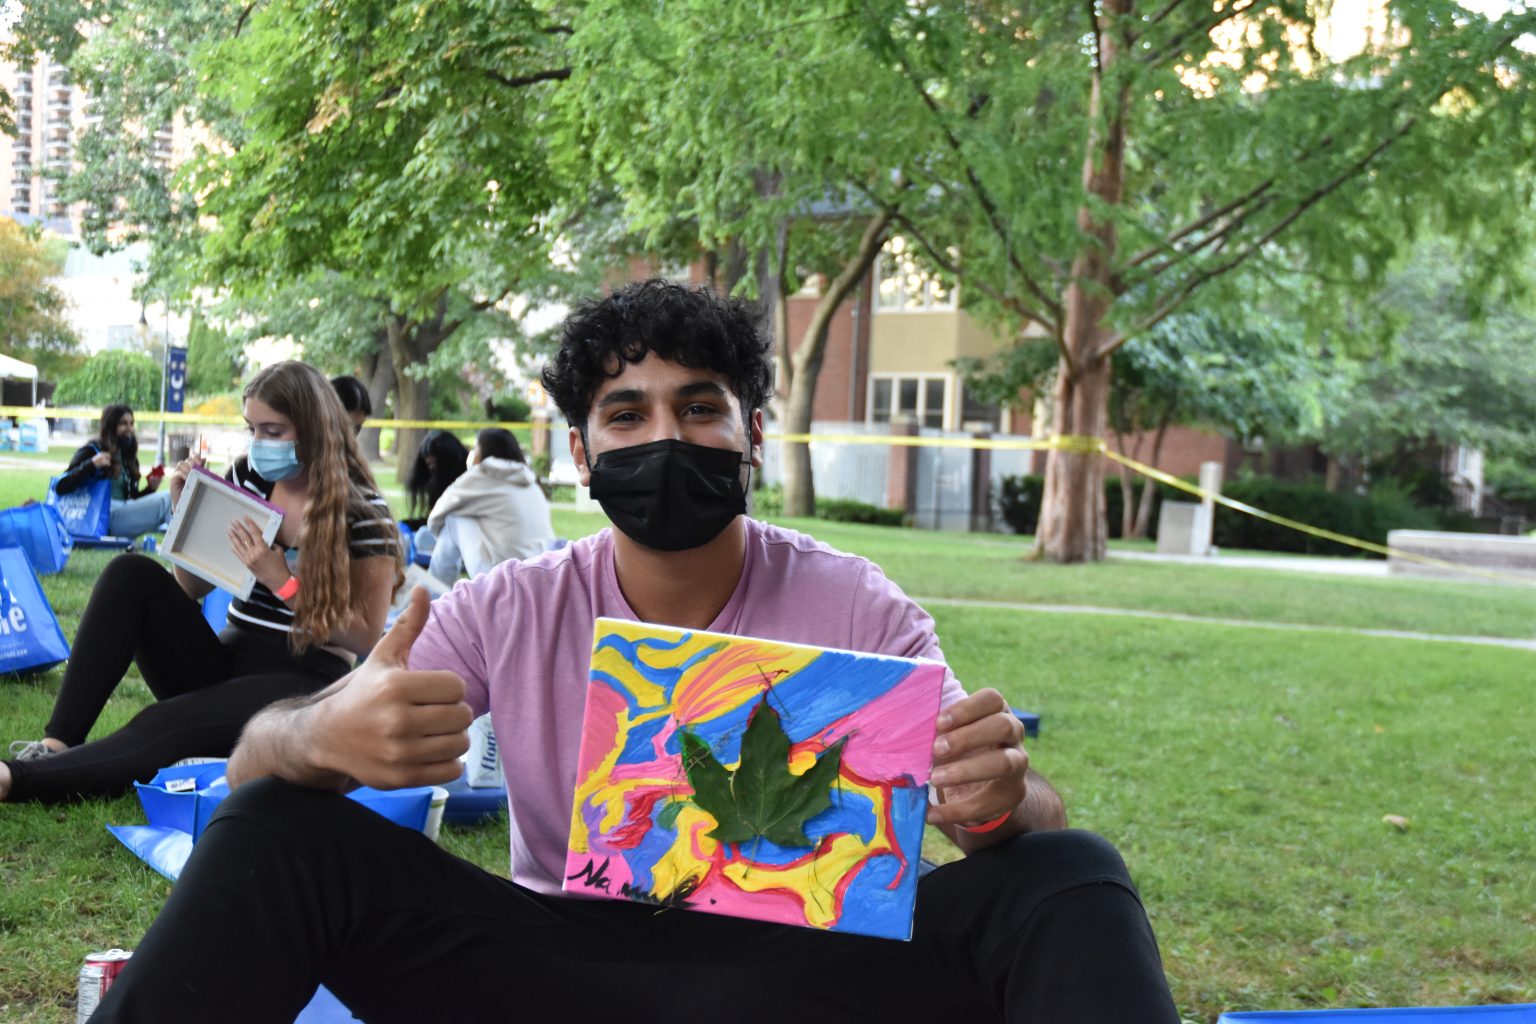 Photograph of a new St. Mike's student holding up a colourful abstract painting with a real leaf placed on the center. He is giving the camera a thumbs up.